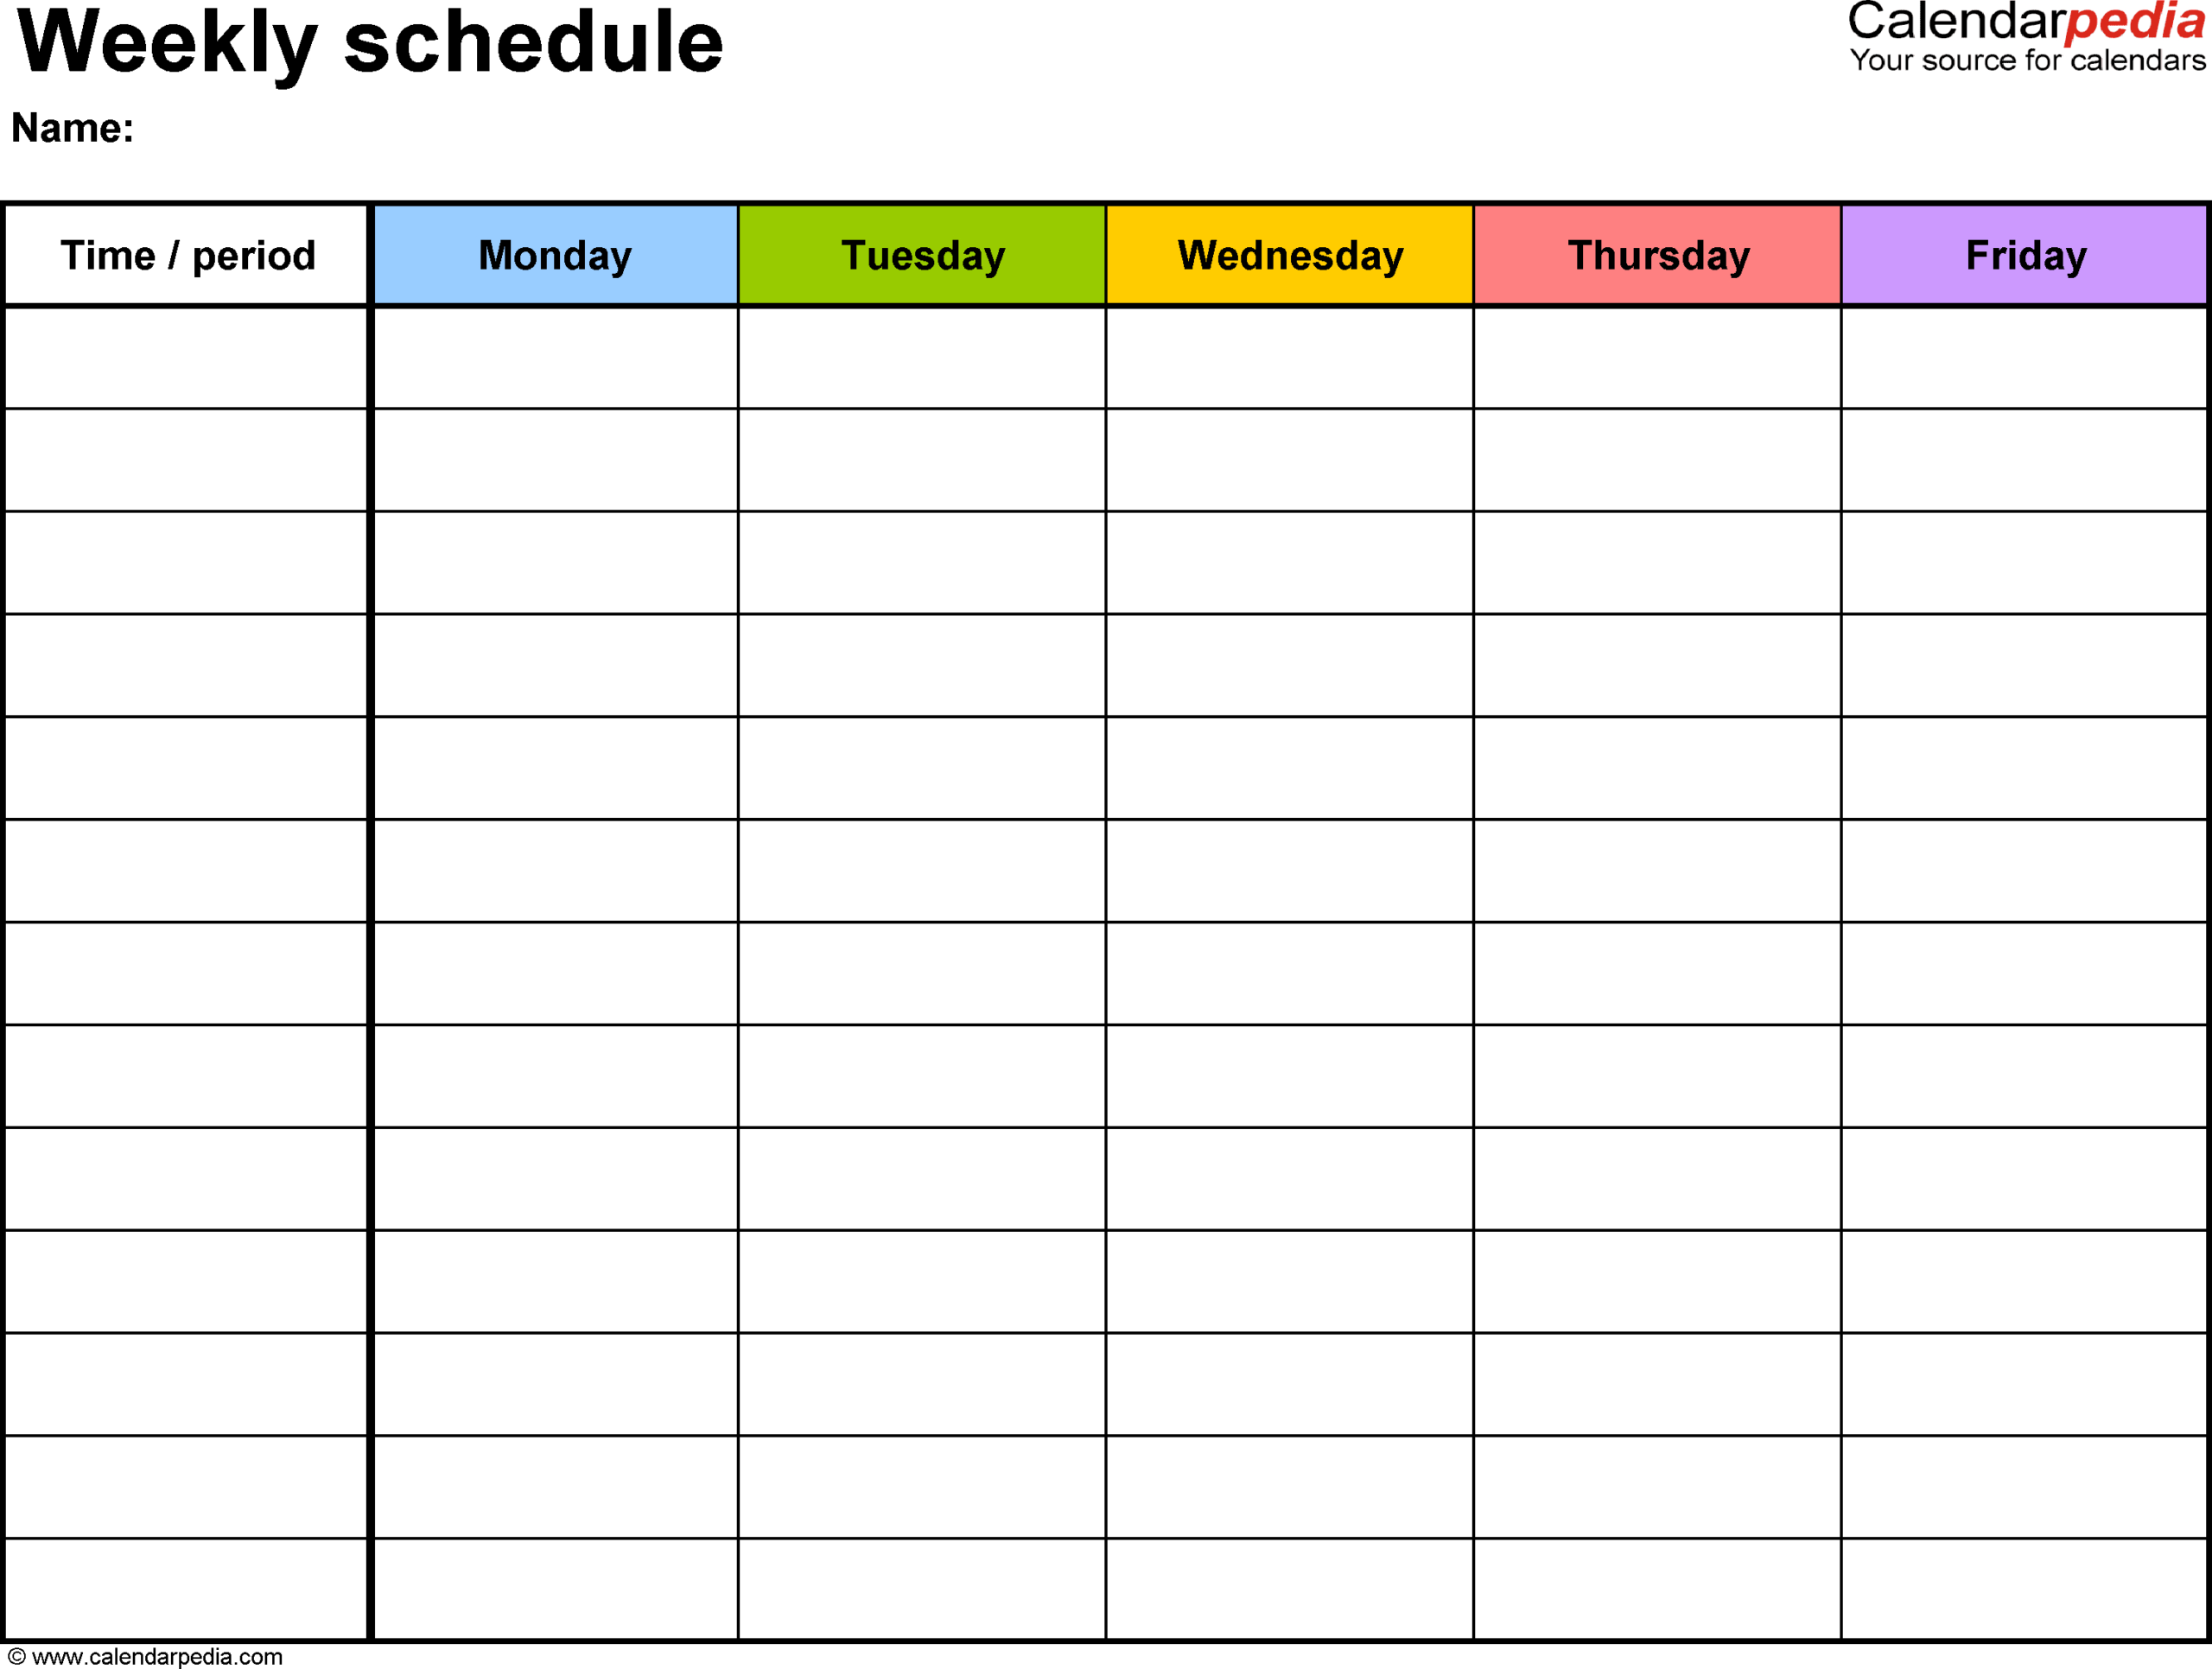 Weekly Schedule Template For Word Version 1: Landscape, 1 within Monday Through Friday Weekly Calendar Template